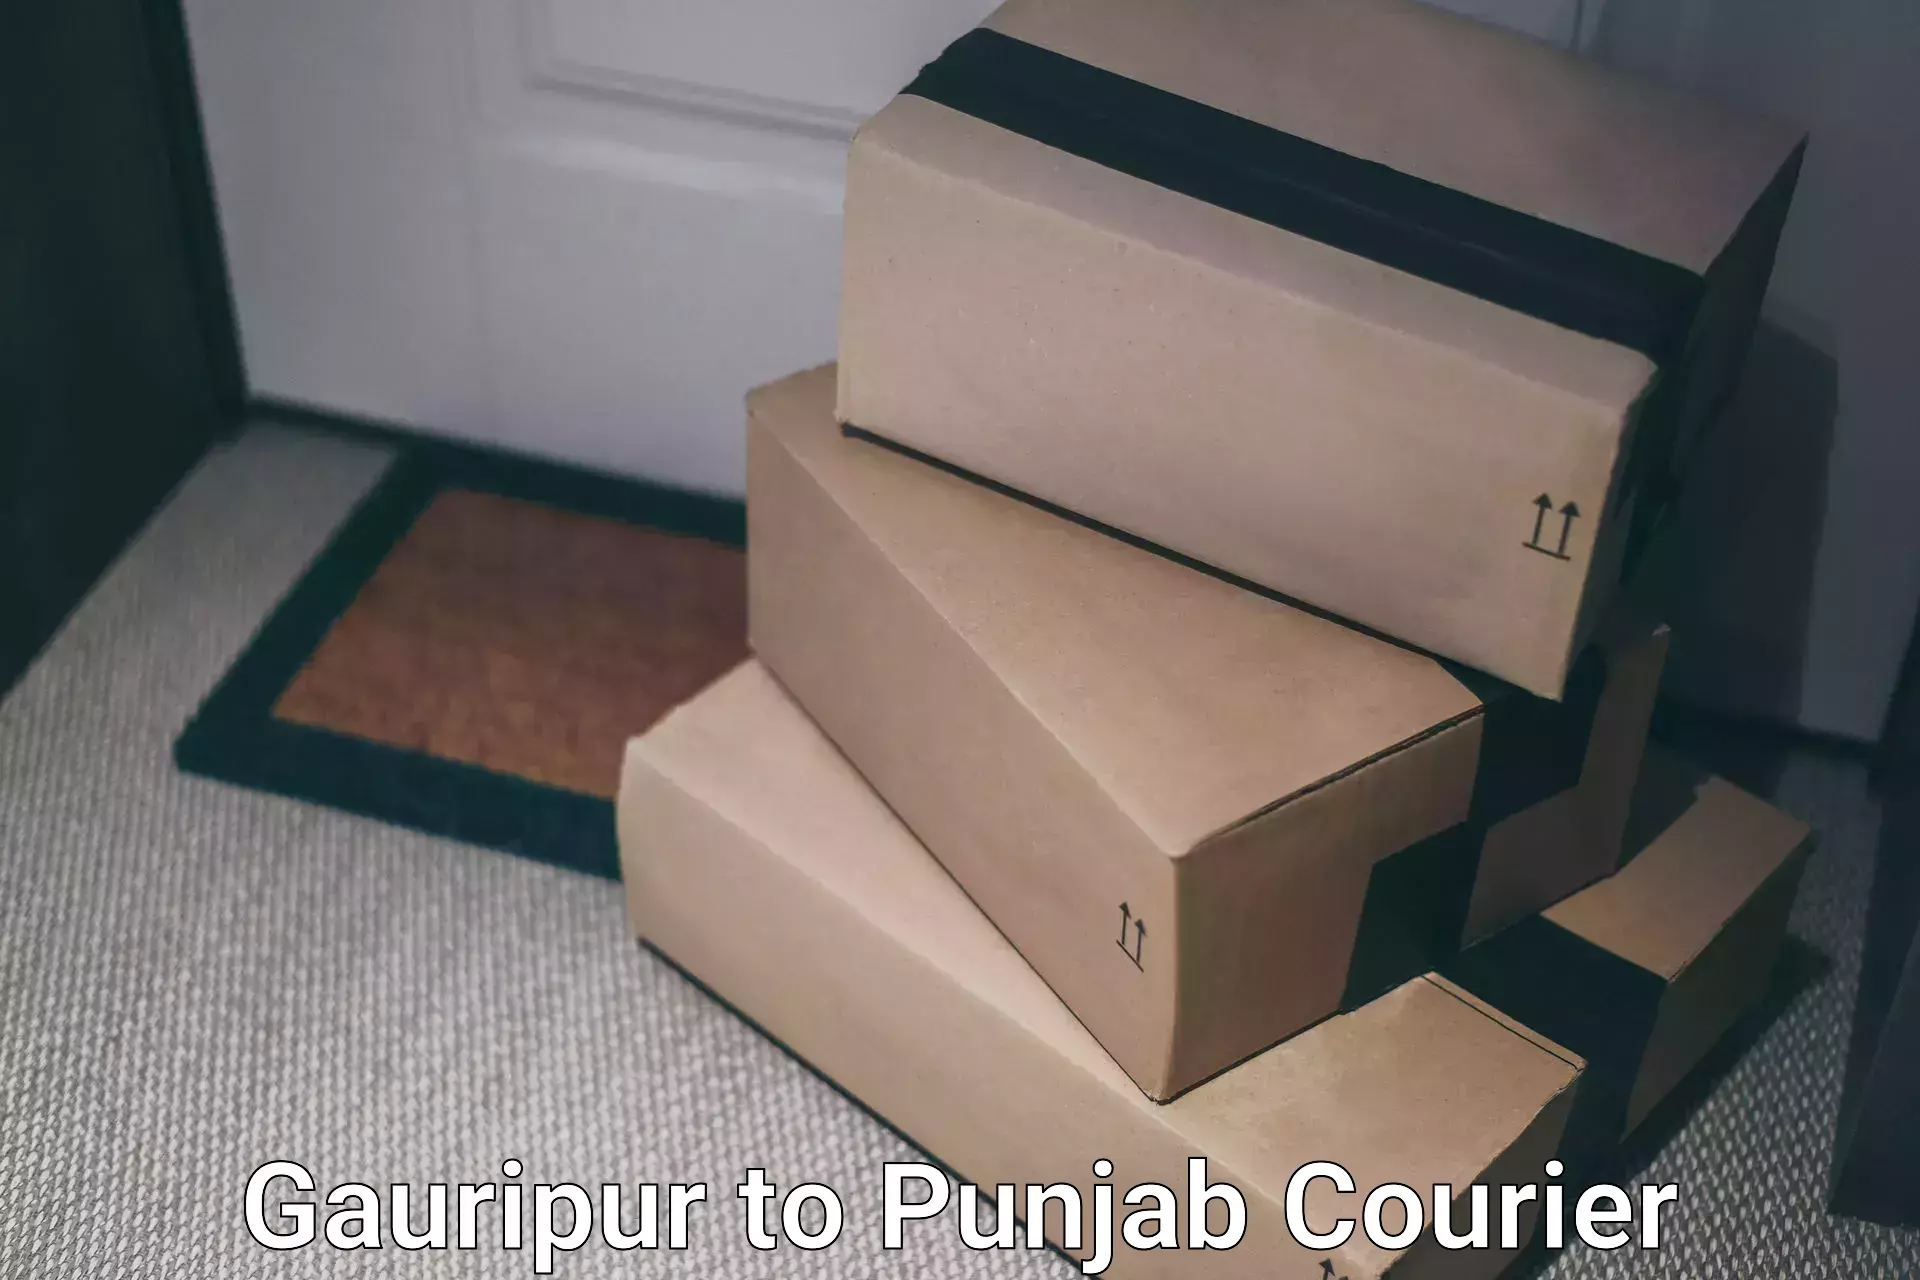 Express delivery network Gauripur to Central University of Punjab Bathinda